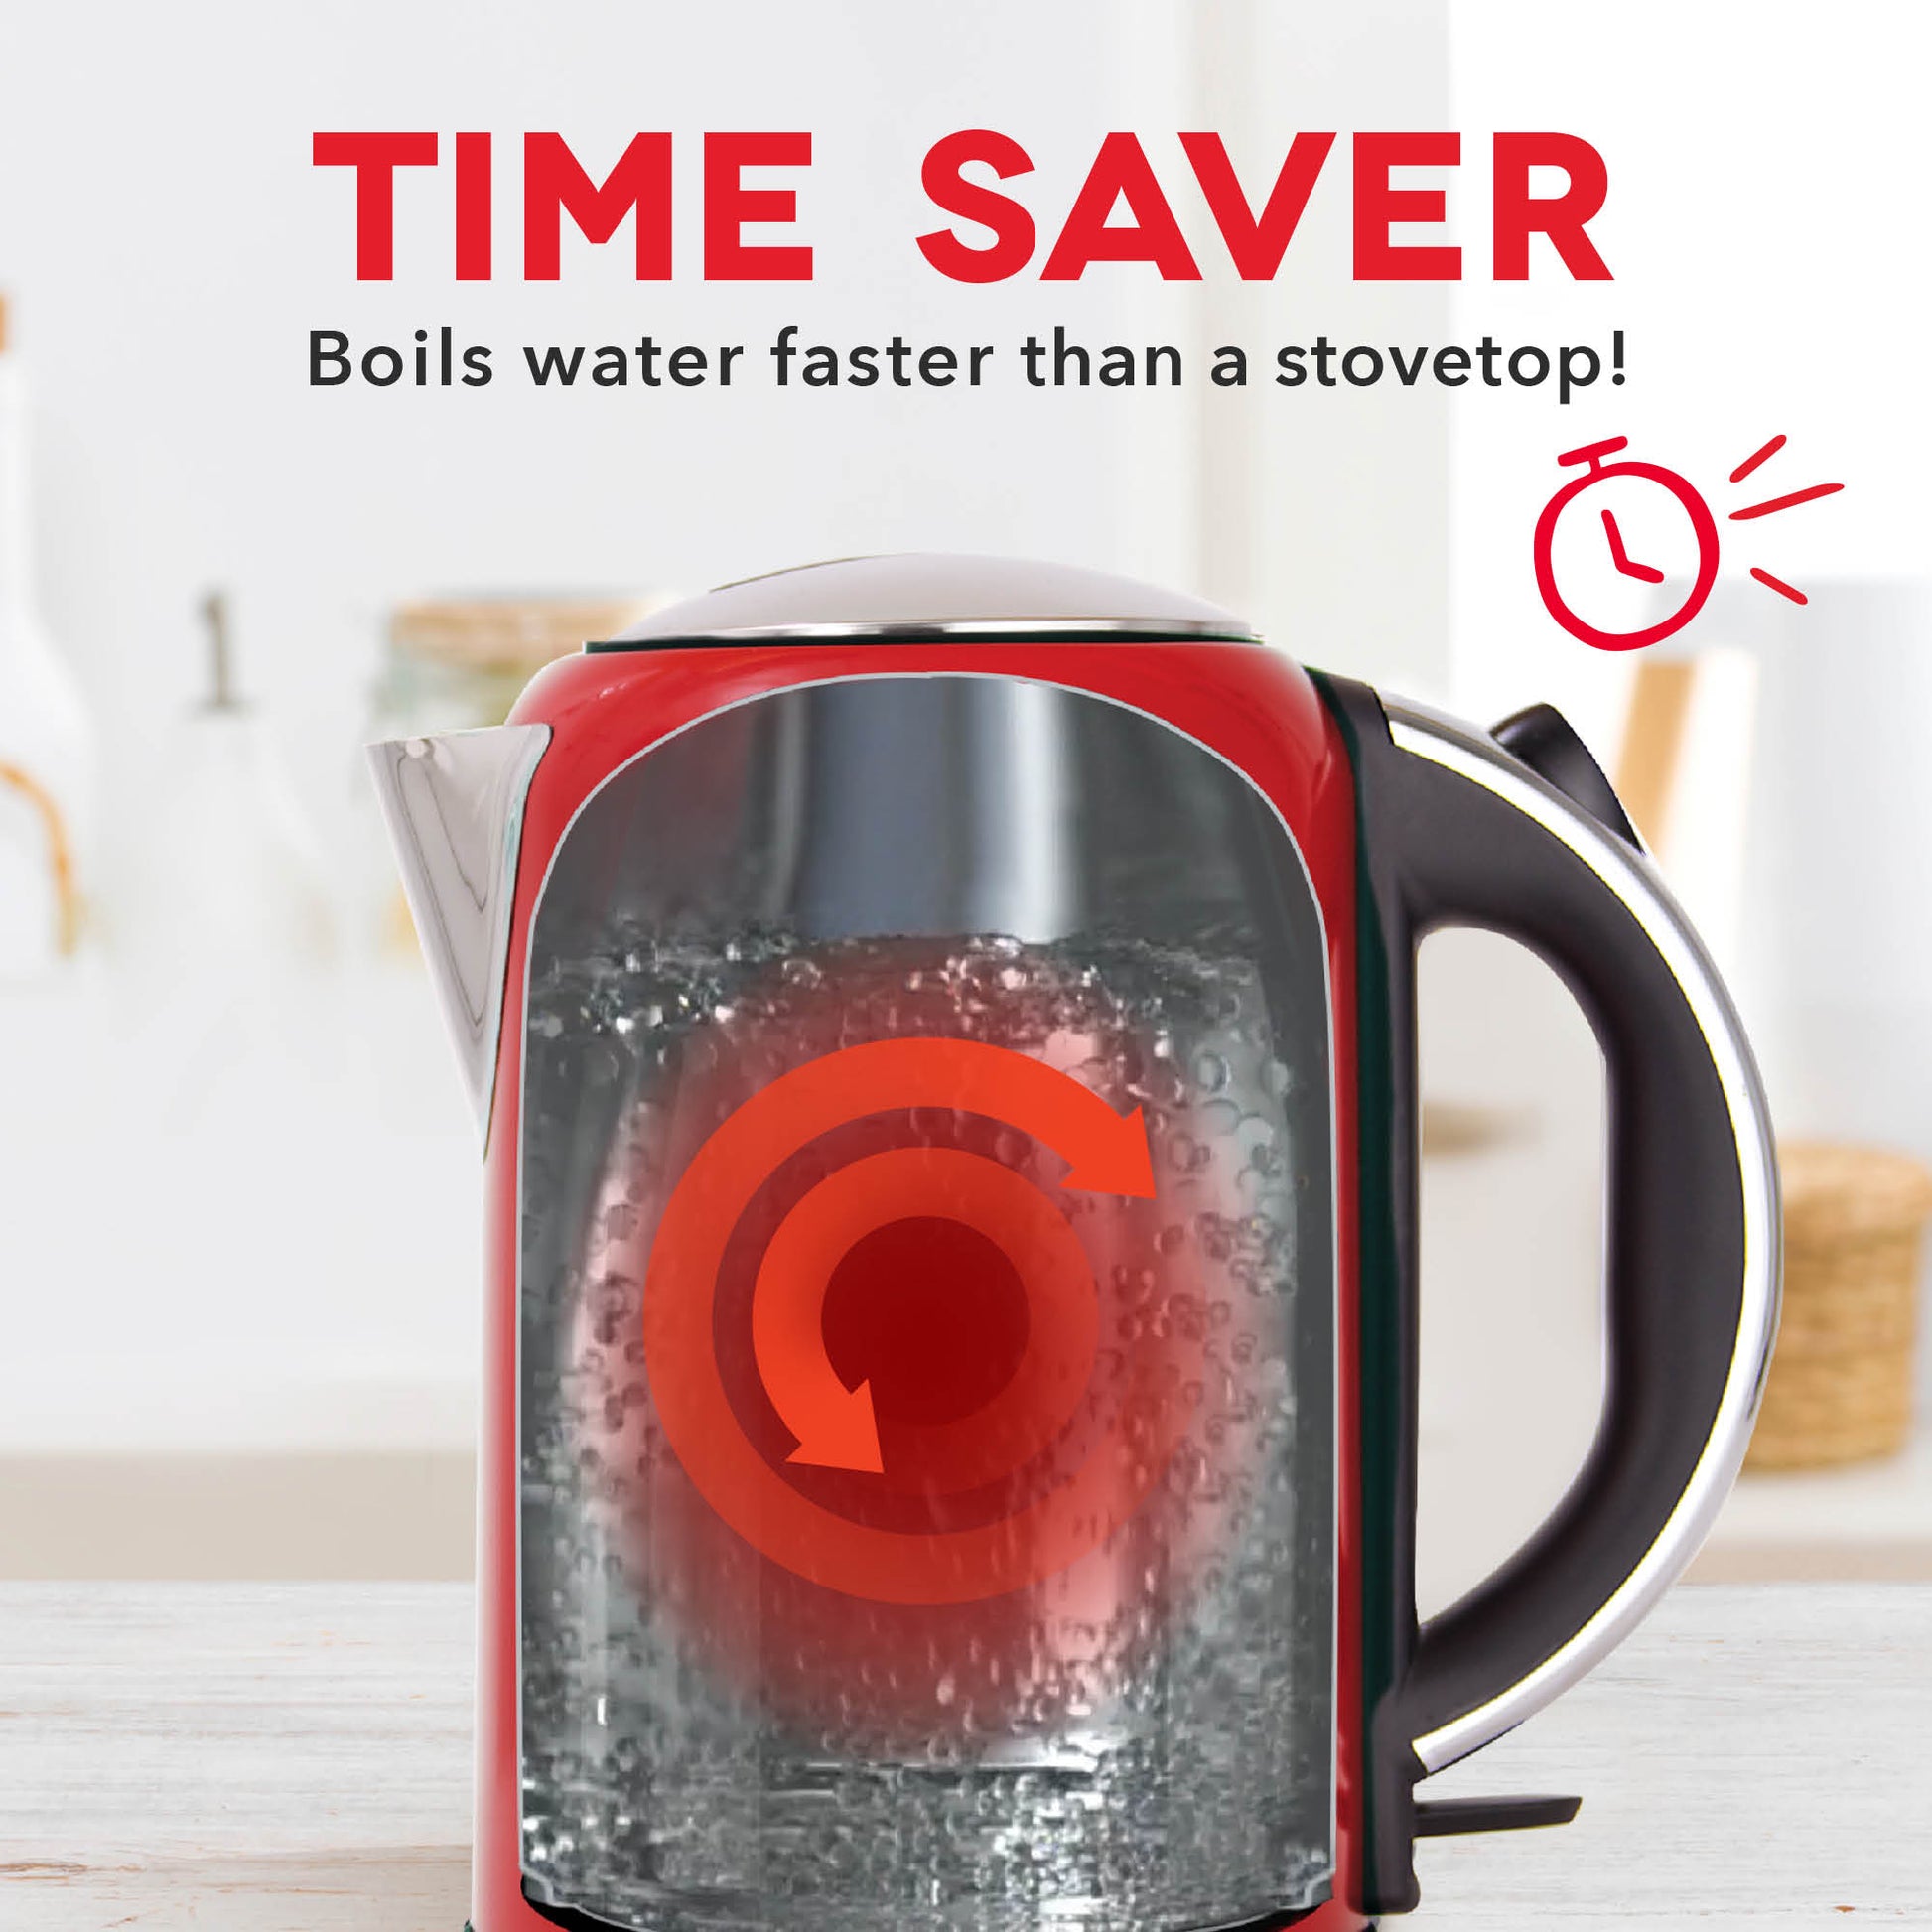 How to Boil Water Using an Electric Kettle 